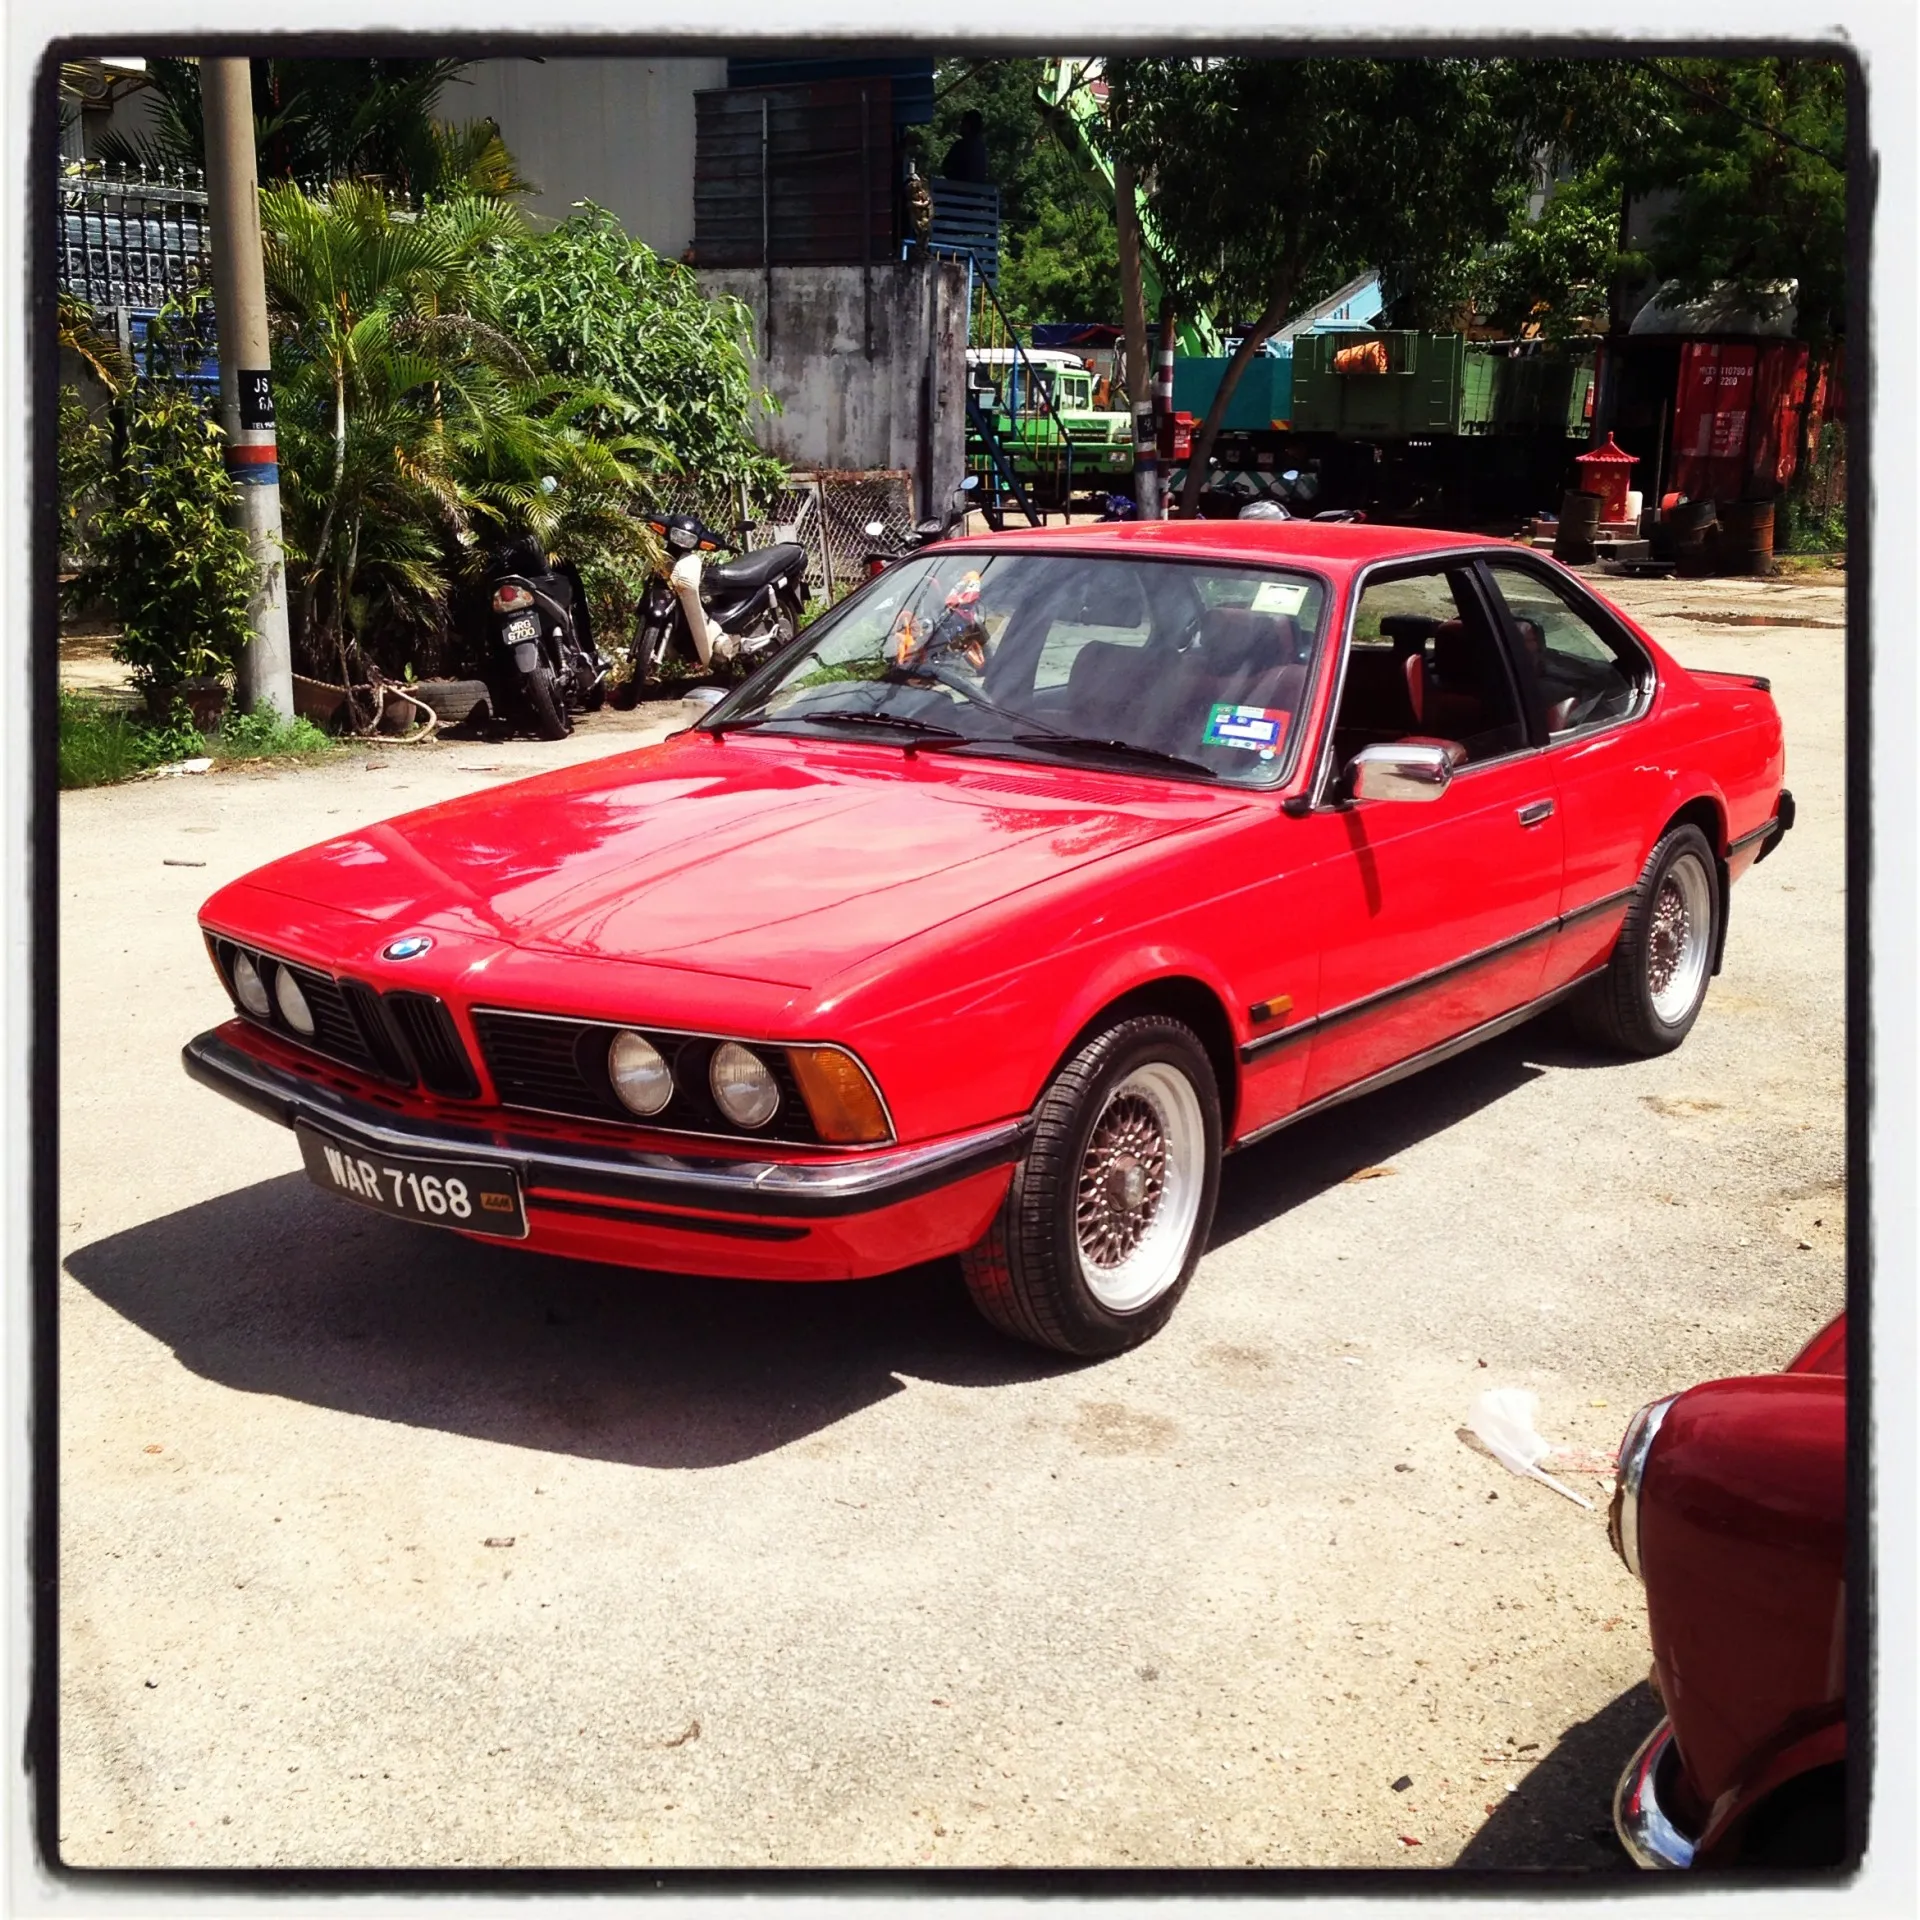 My BMW 635CSi is 36-years old and driven regularly. It's all about the regular maintenance...